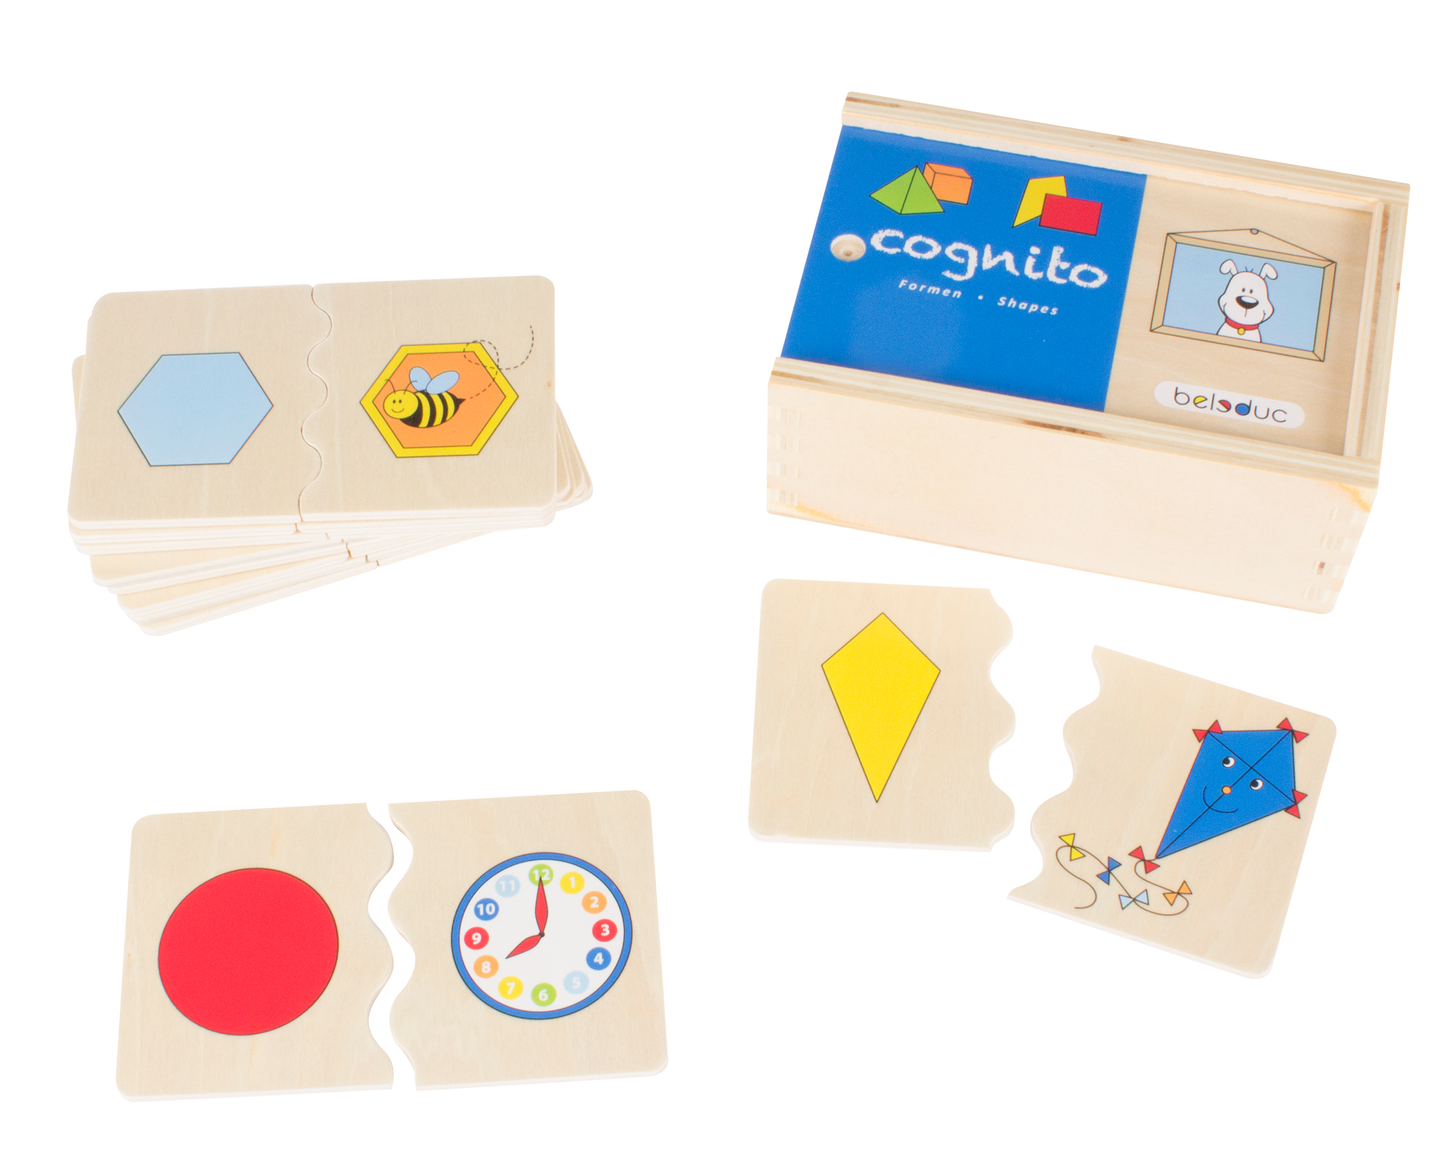 Beleduc Cognito Shapes Matching Game 形狀配對遊戲